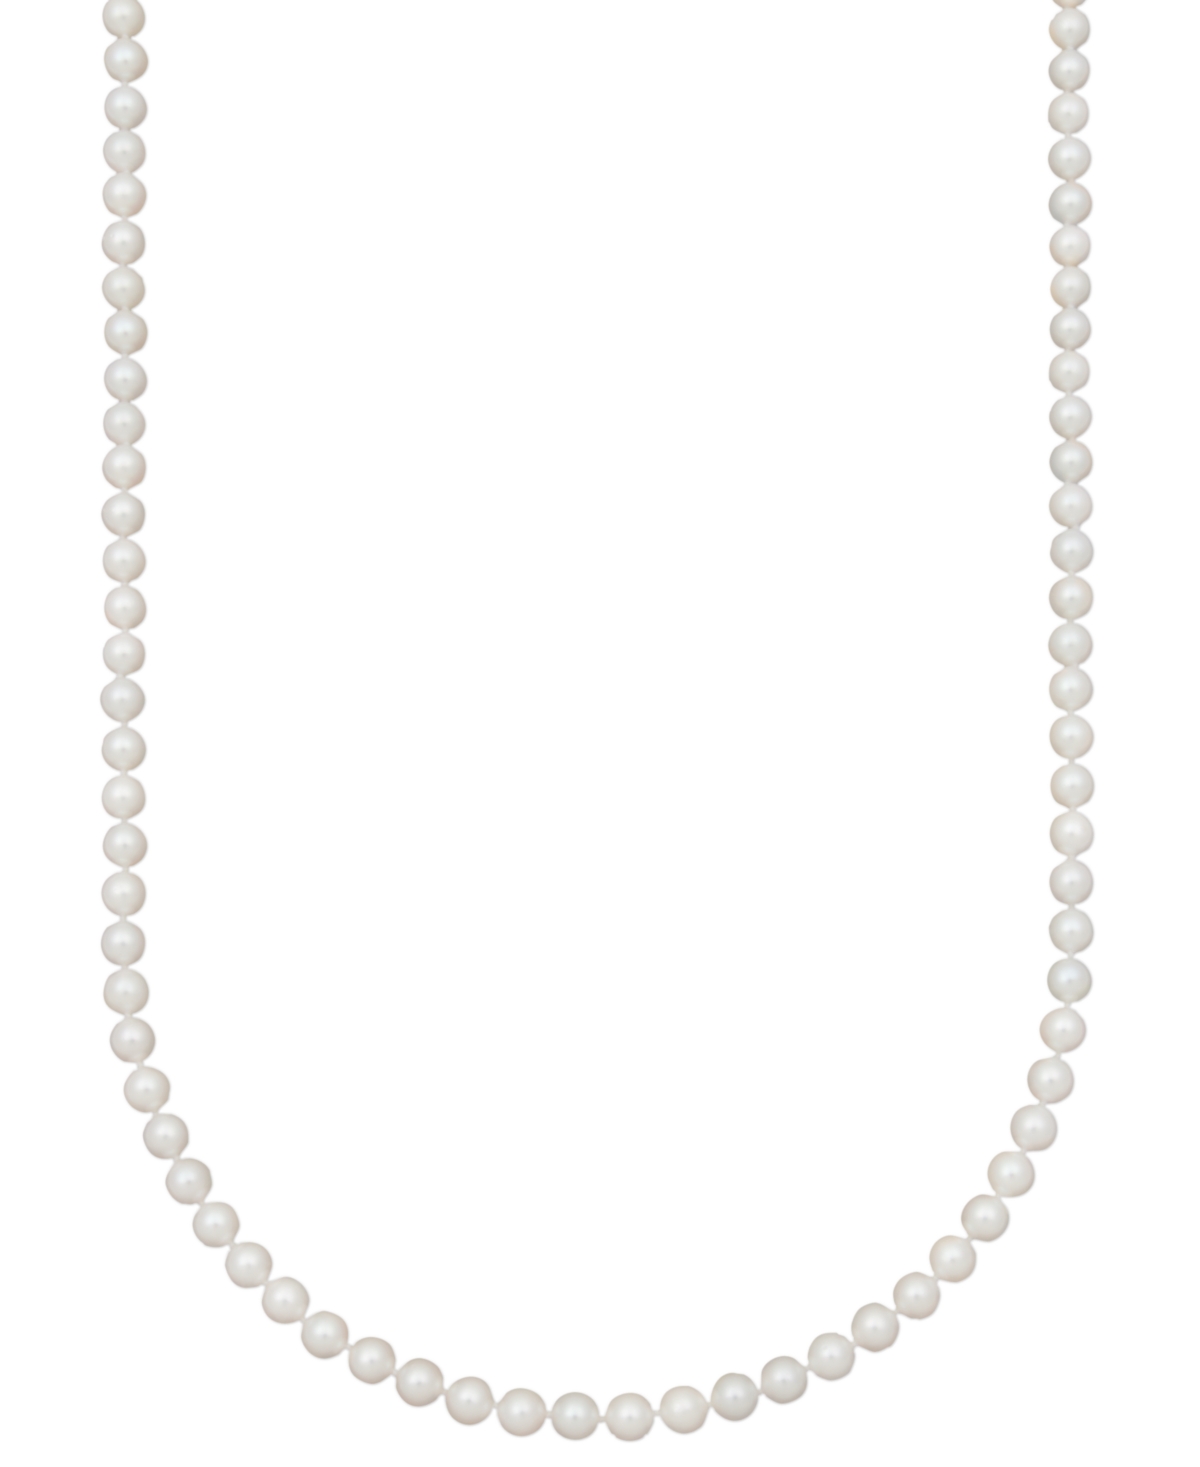 Belle de Mer Pearl Necklace, 20" 14k Gold A+ Akoya Cultured Pearl Strand (6-6-1/2mm)